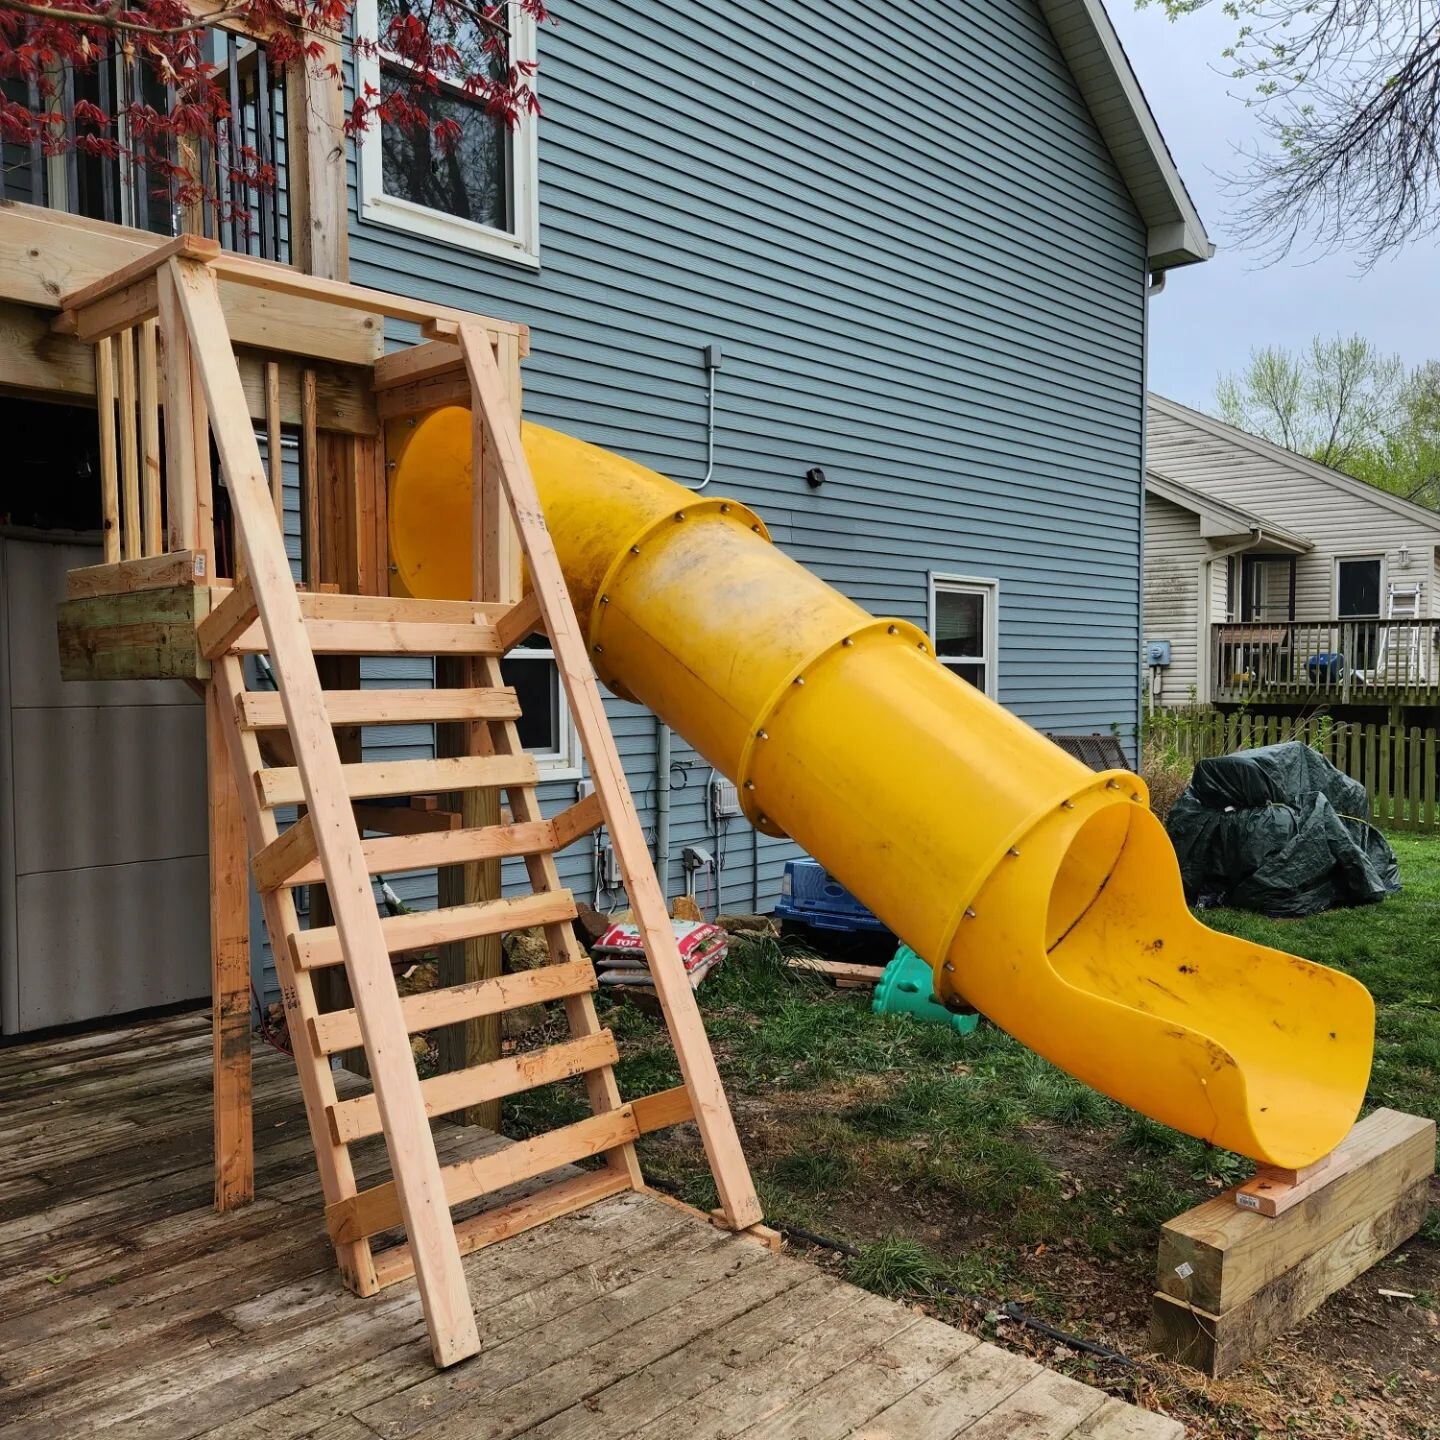 Built the kiddos a slide in the backyard with a tunnel slide we had from demoing a playground last year.

#makingdecksfunagain